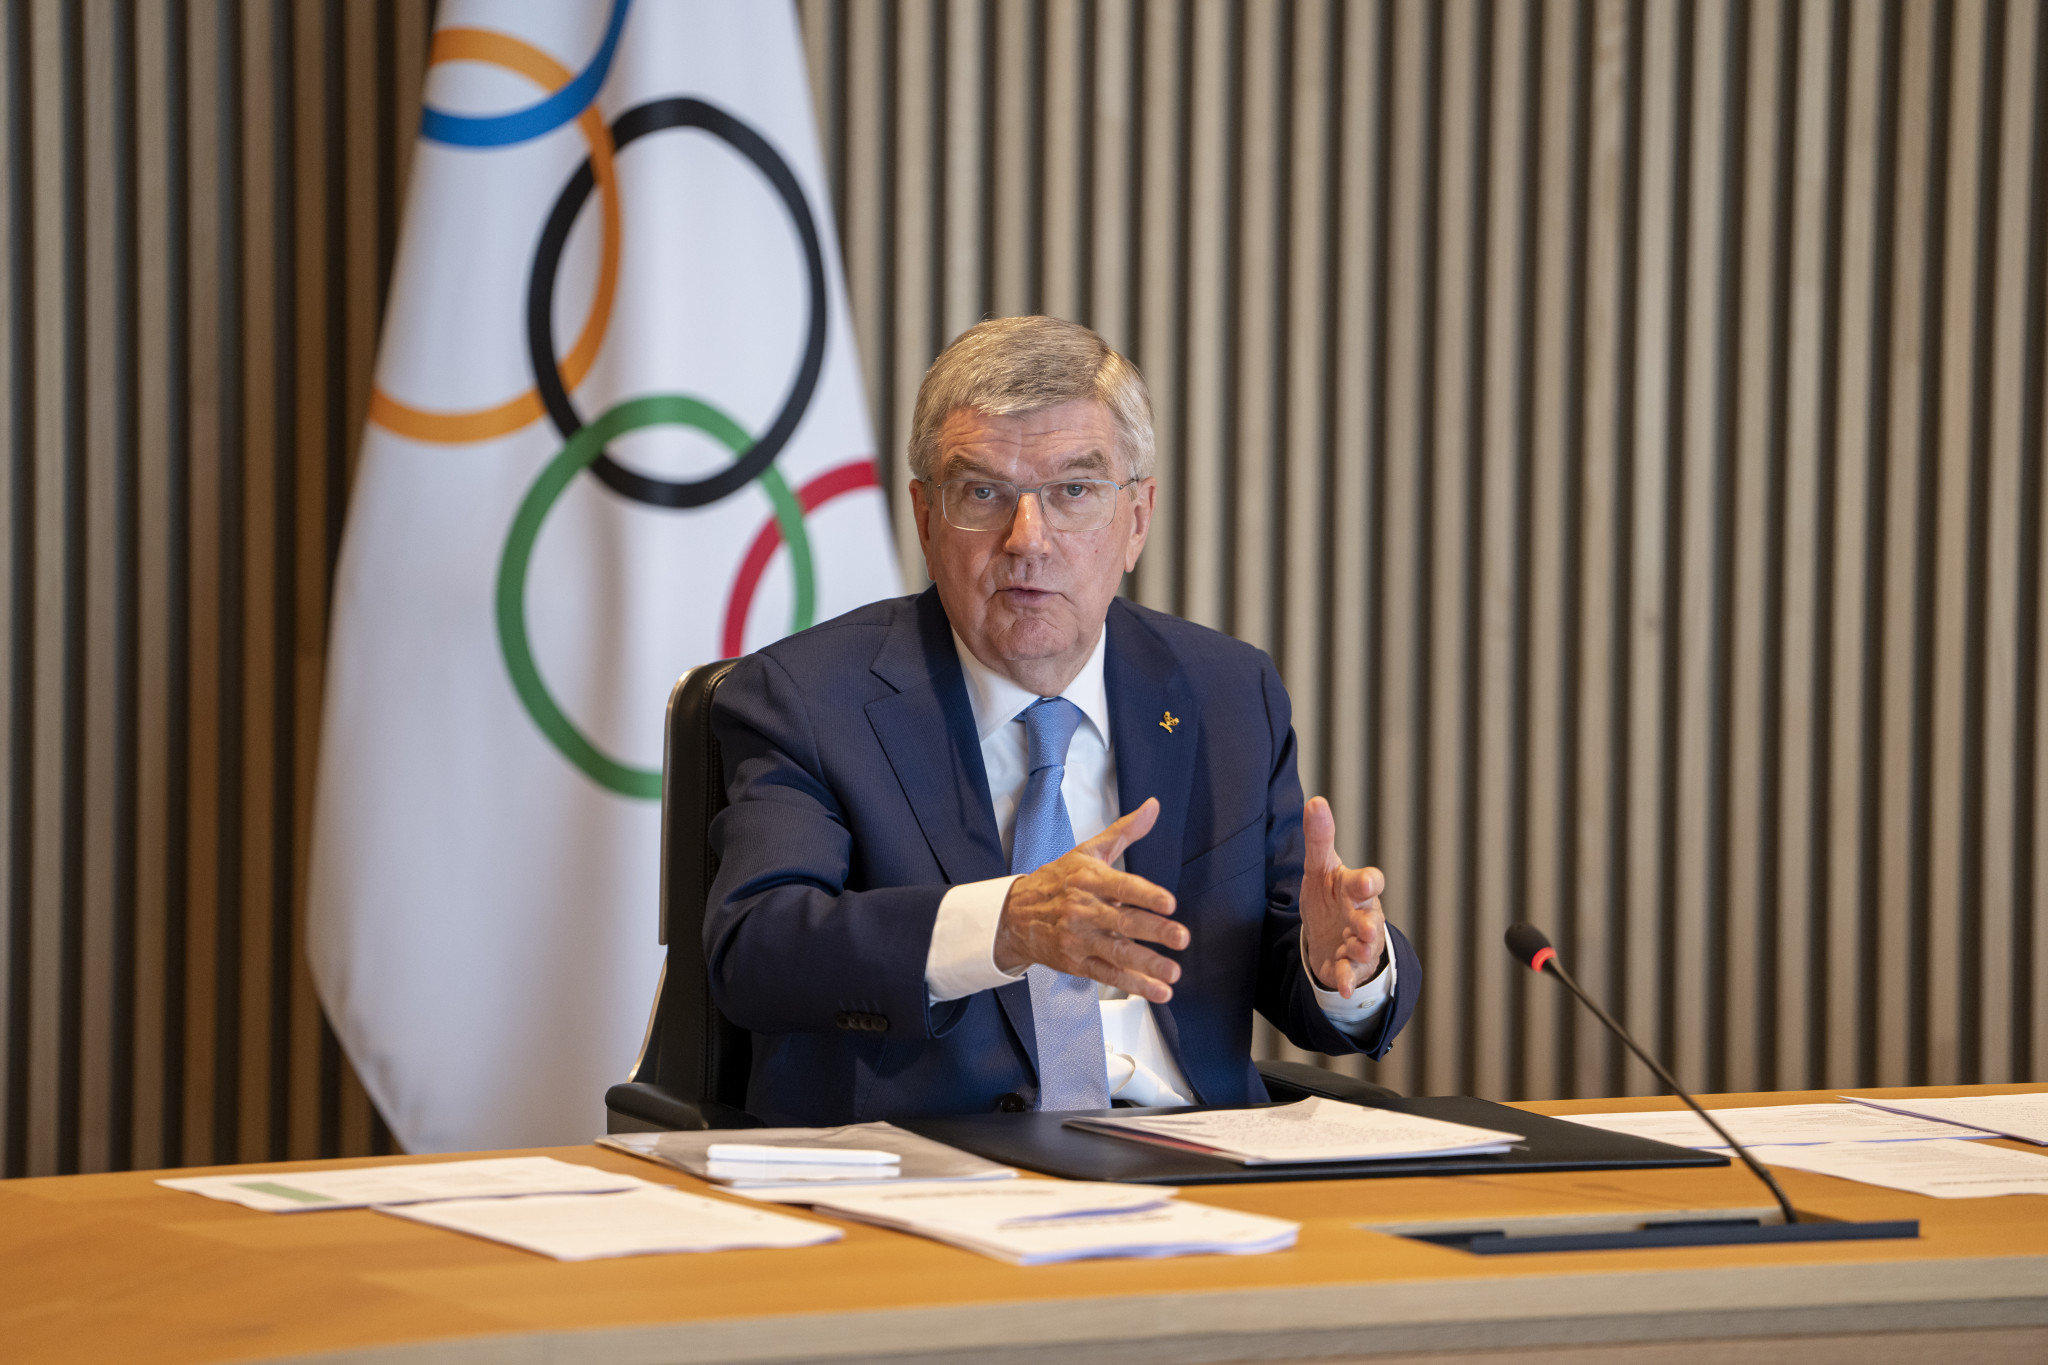 IOC President Thomas Bach has said the Executive Board has to respect the statements of the UN rapporteurs despite directly going against one in the latest set of recommendations ©IOC